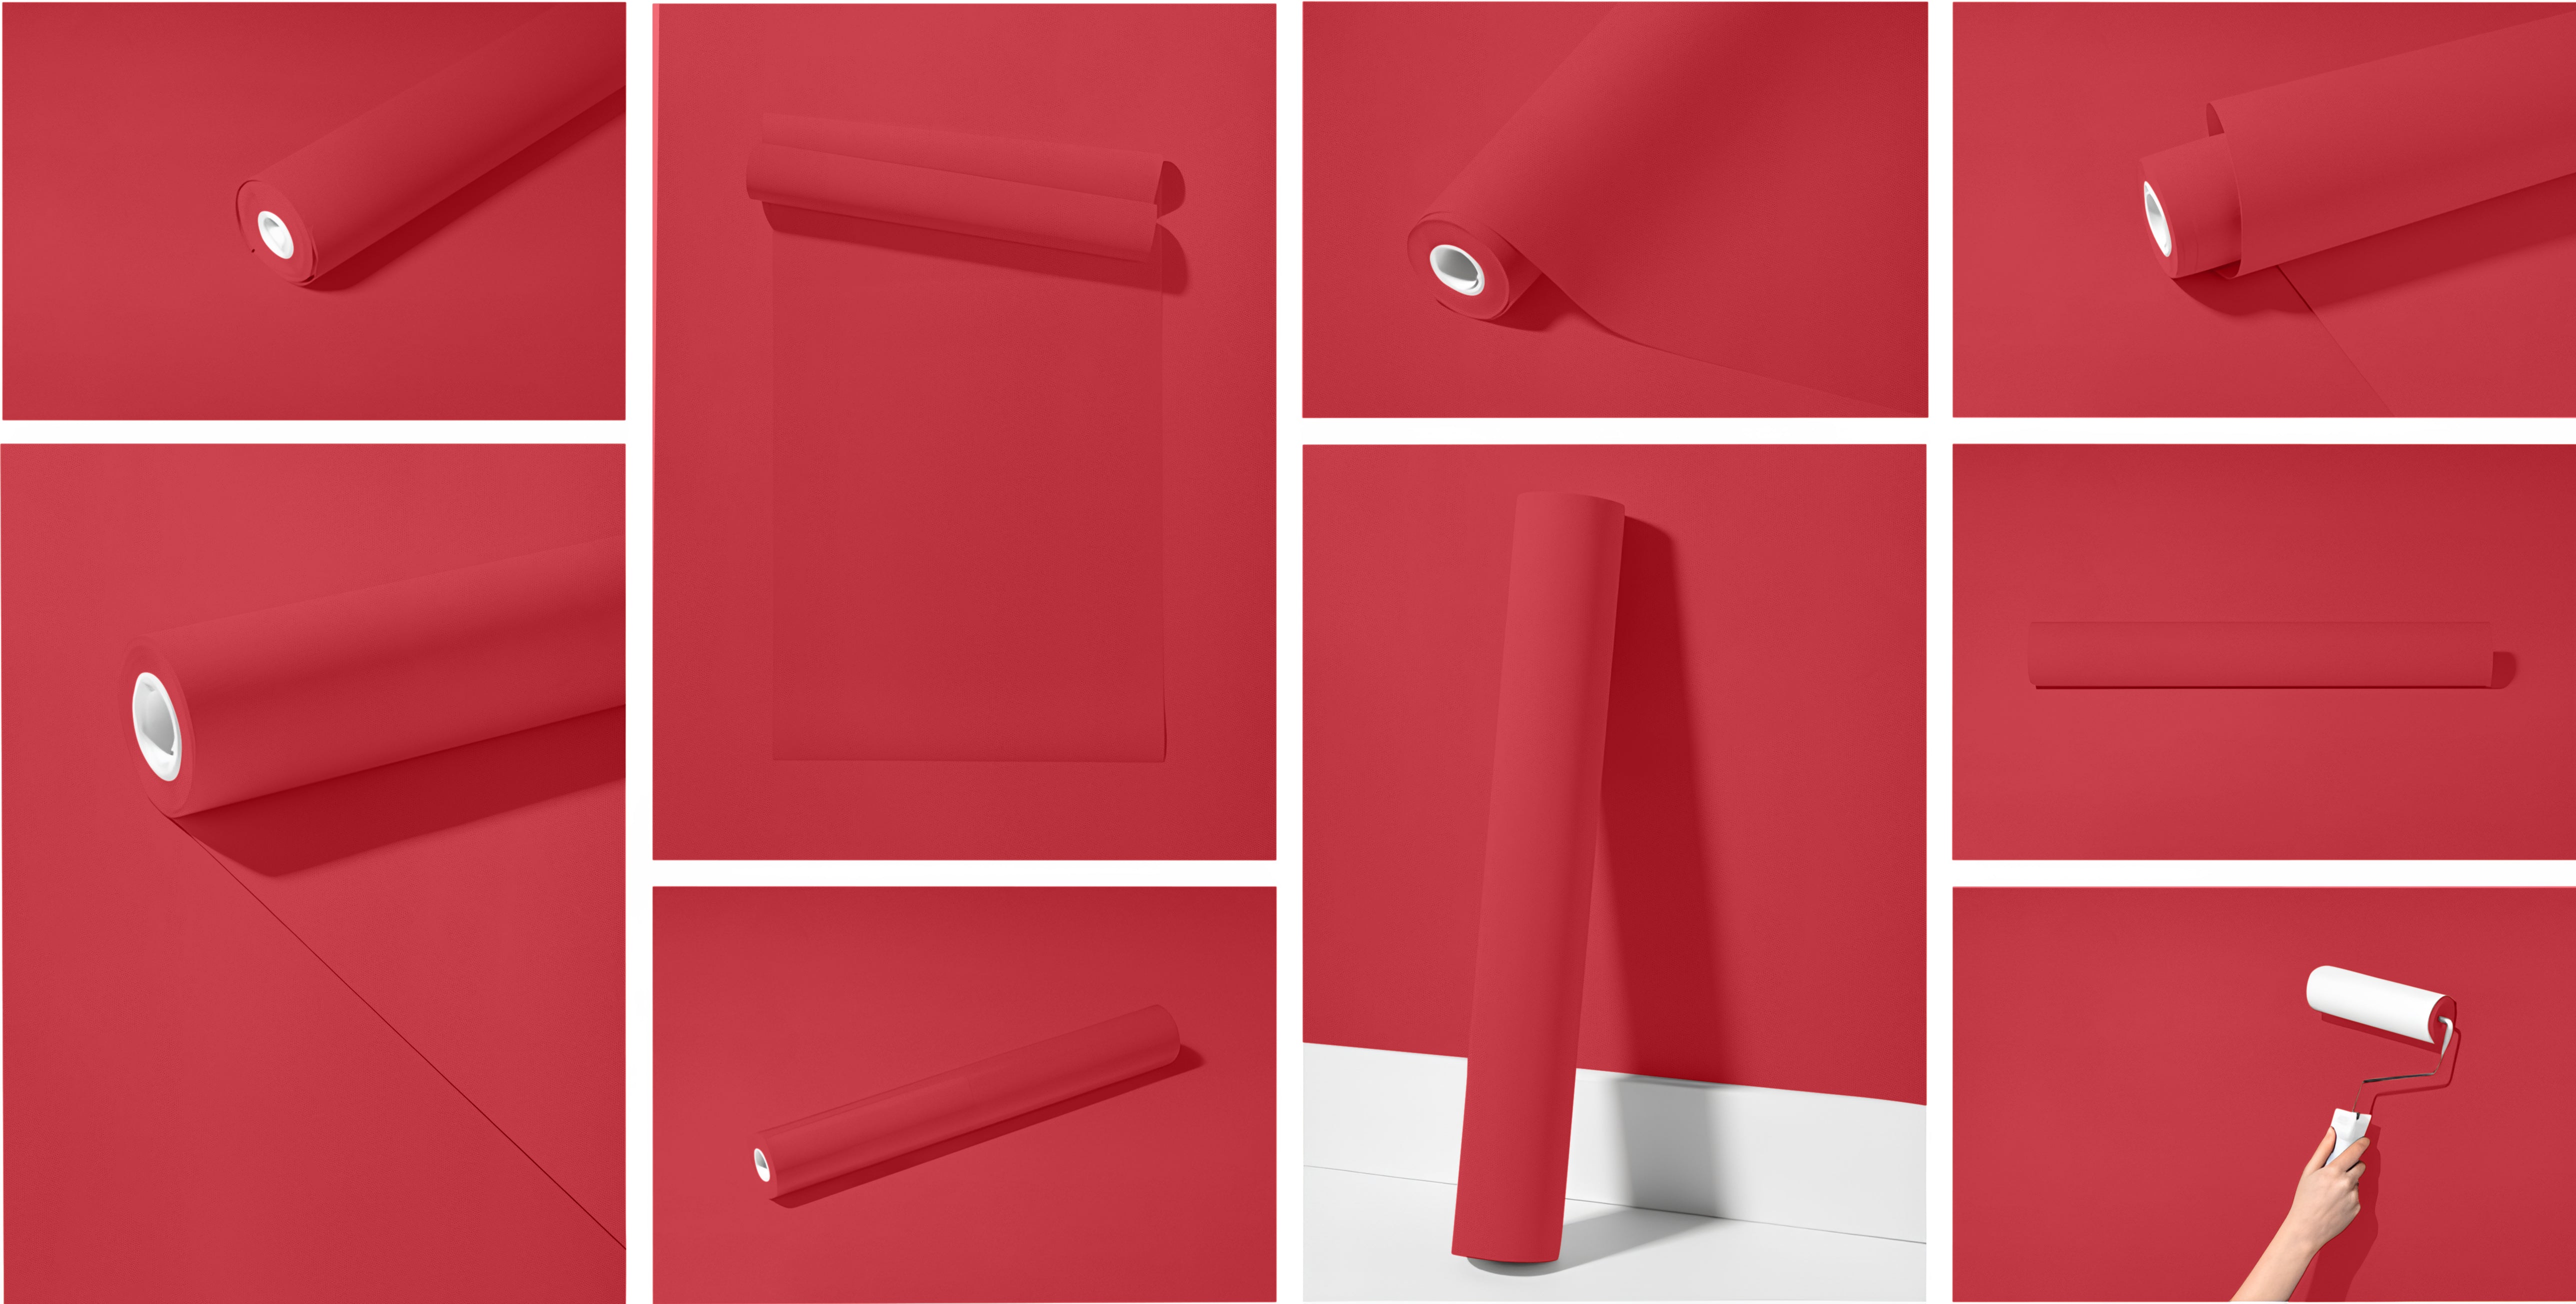 Peel & Stick Removable Re-usable Paint - Color RAL 3018 Strawberry Red - offRAL™ - RALRAW LLC, USA